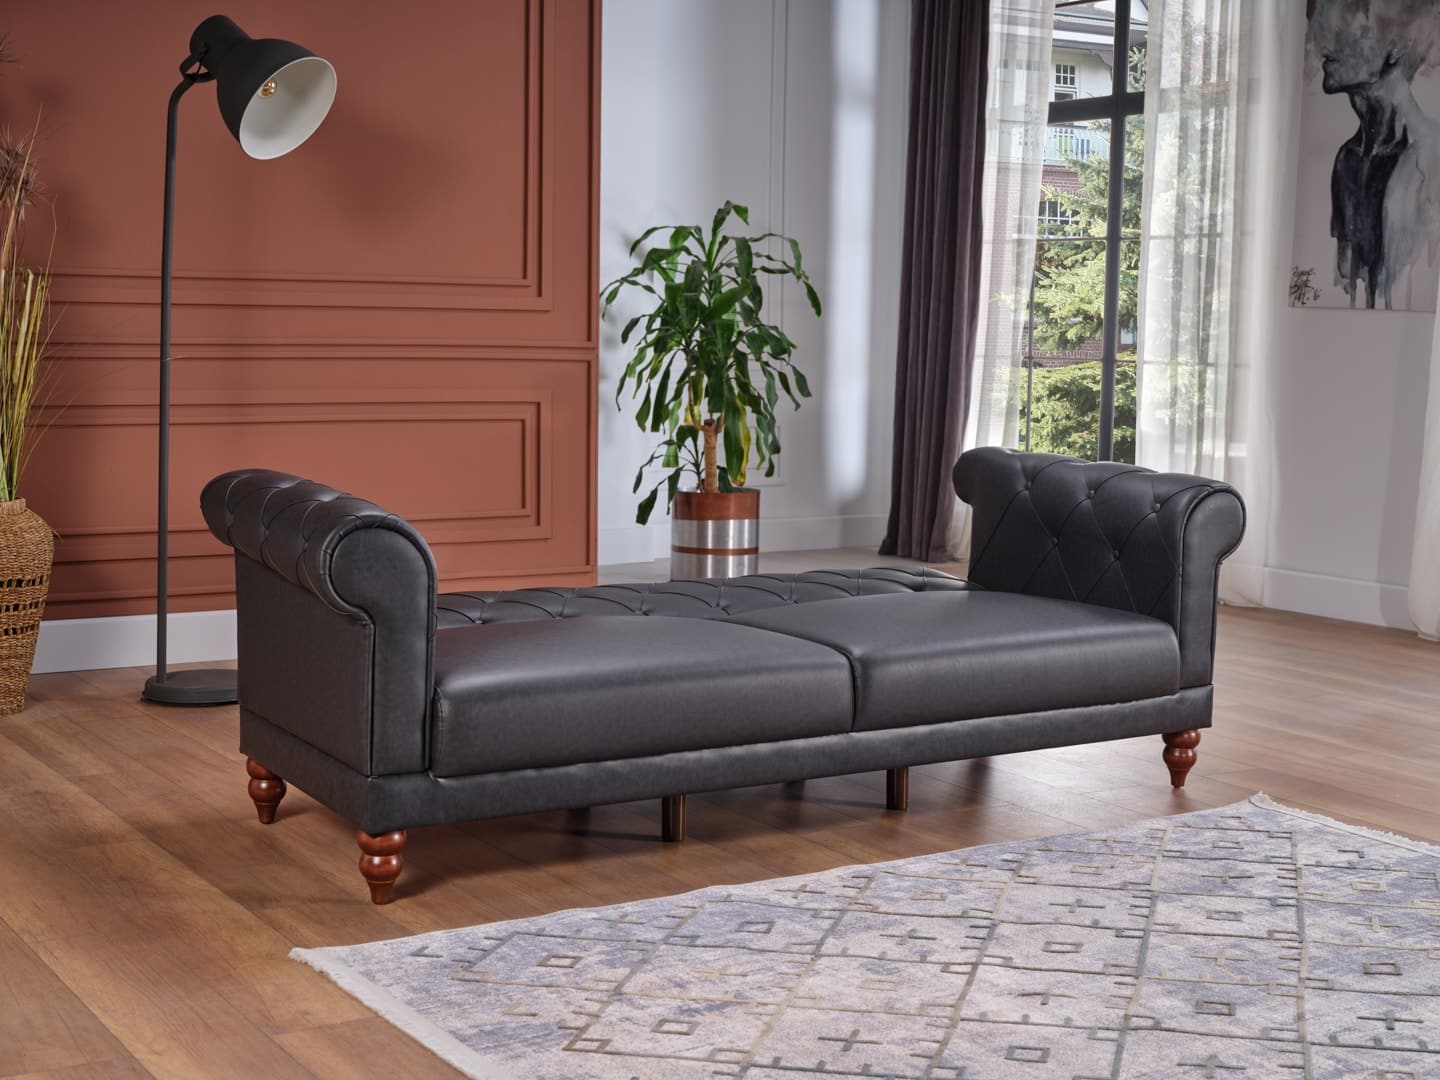 Muse Living Room Set Sofa Loveseat Armchair by Bellona